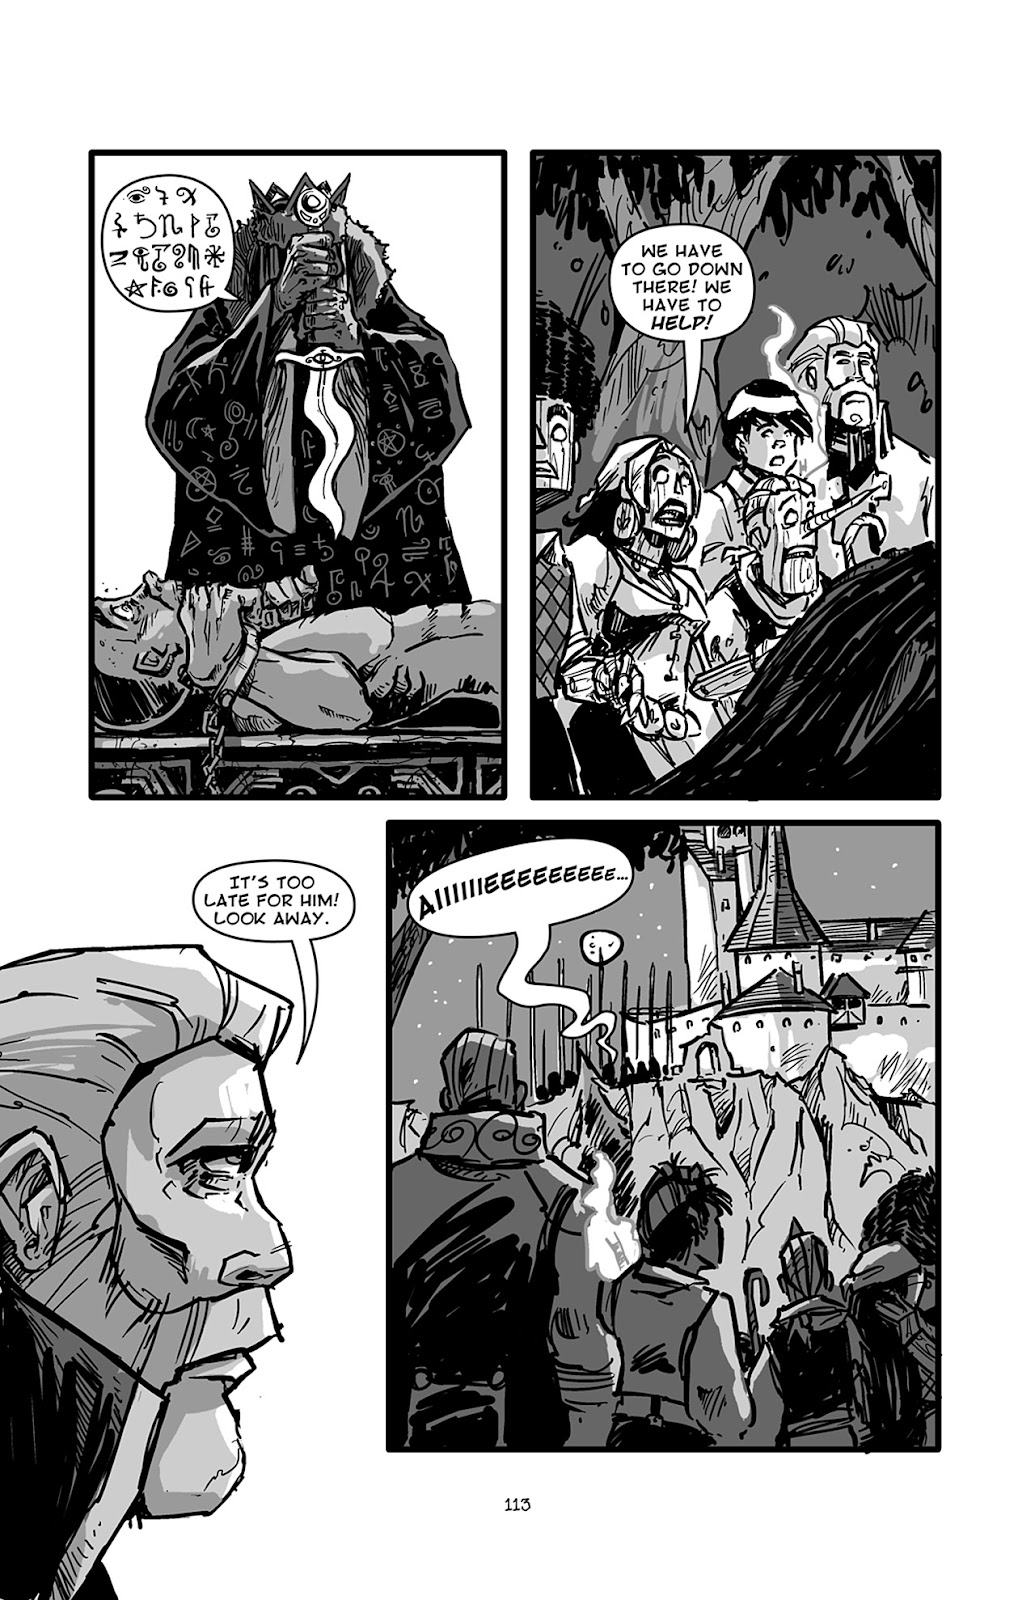 Pinocchio: Vampire Slayer - Of Wood and Blood issue 5 - Page 14